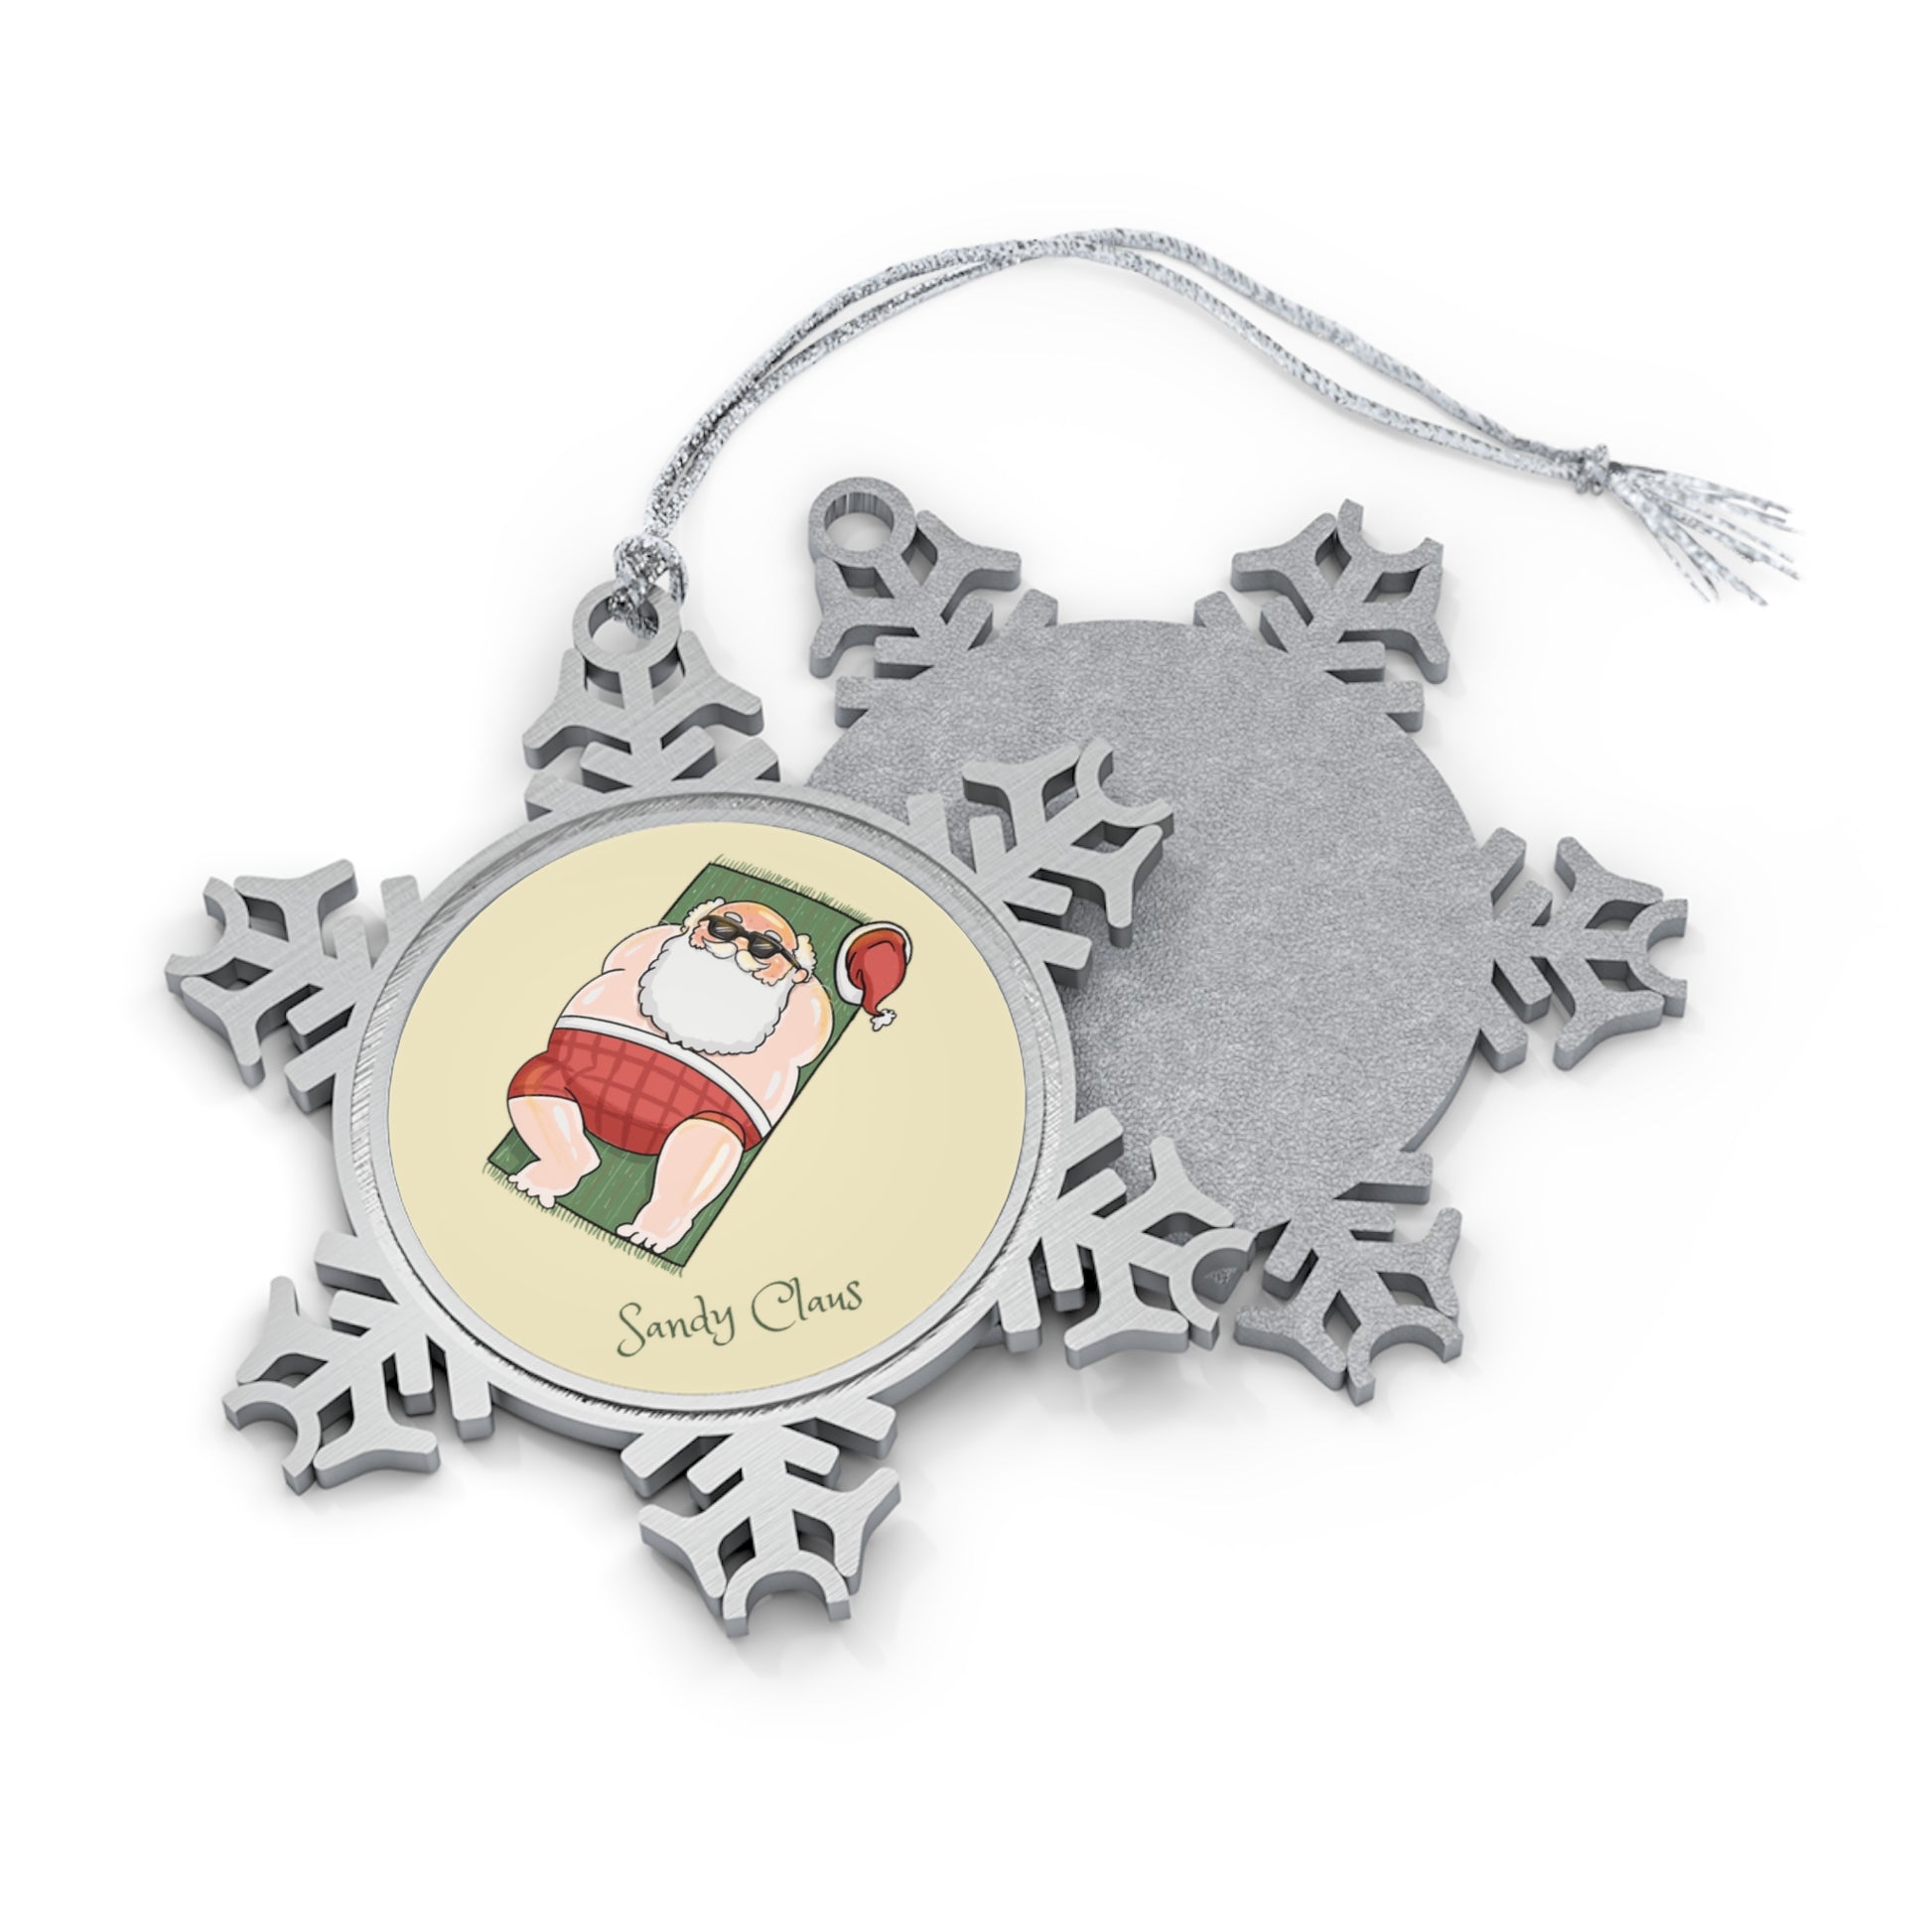 Sandy Claus - Pewter Snowflake Ornament Christmas Ornament